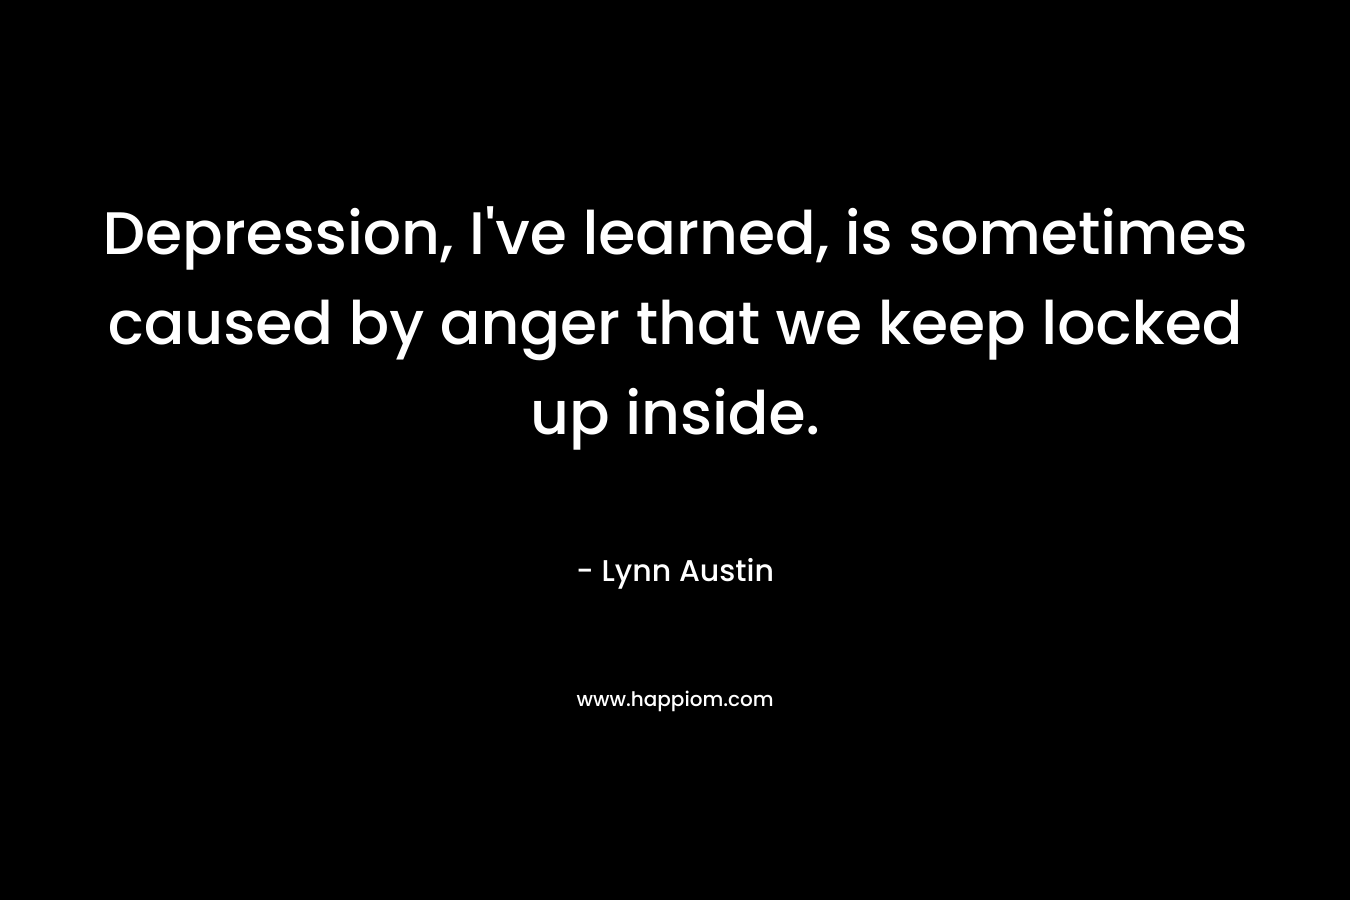 Depression, I've learned, is sometimes caused by anger that we keep locked up inside.